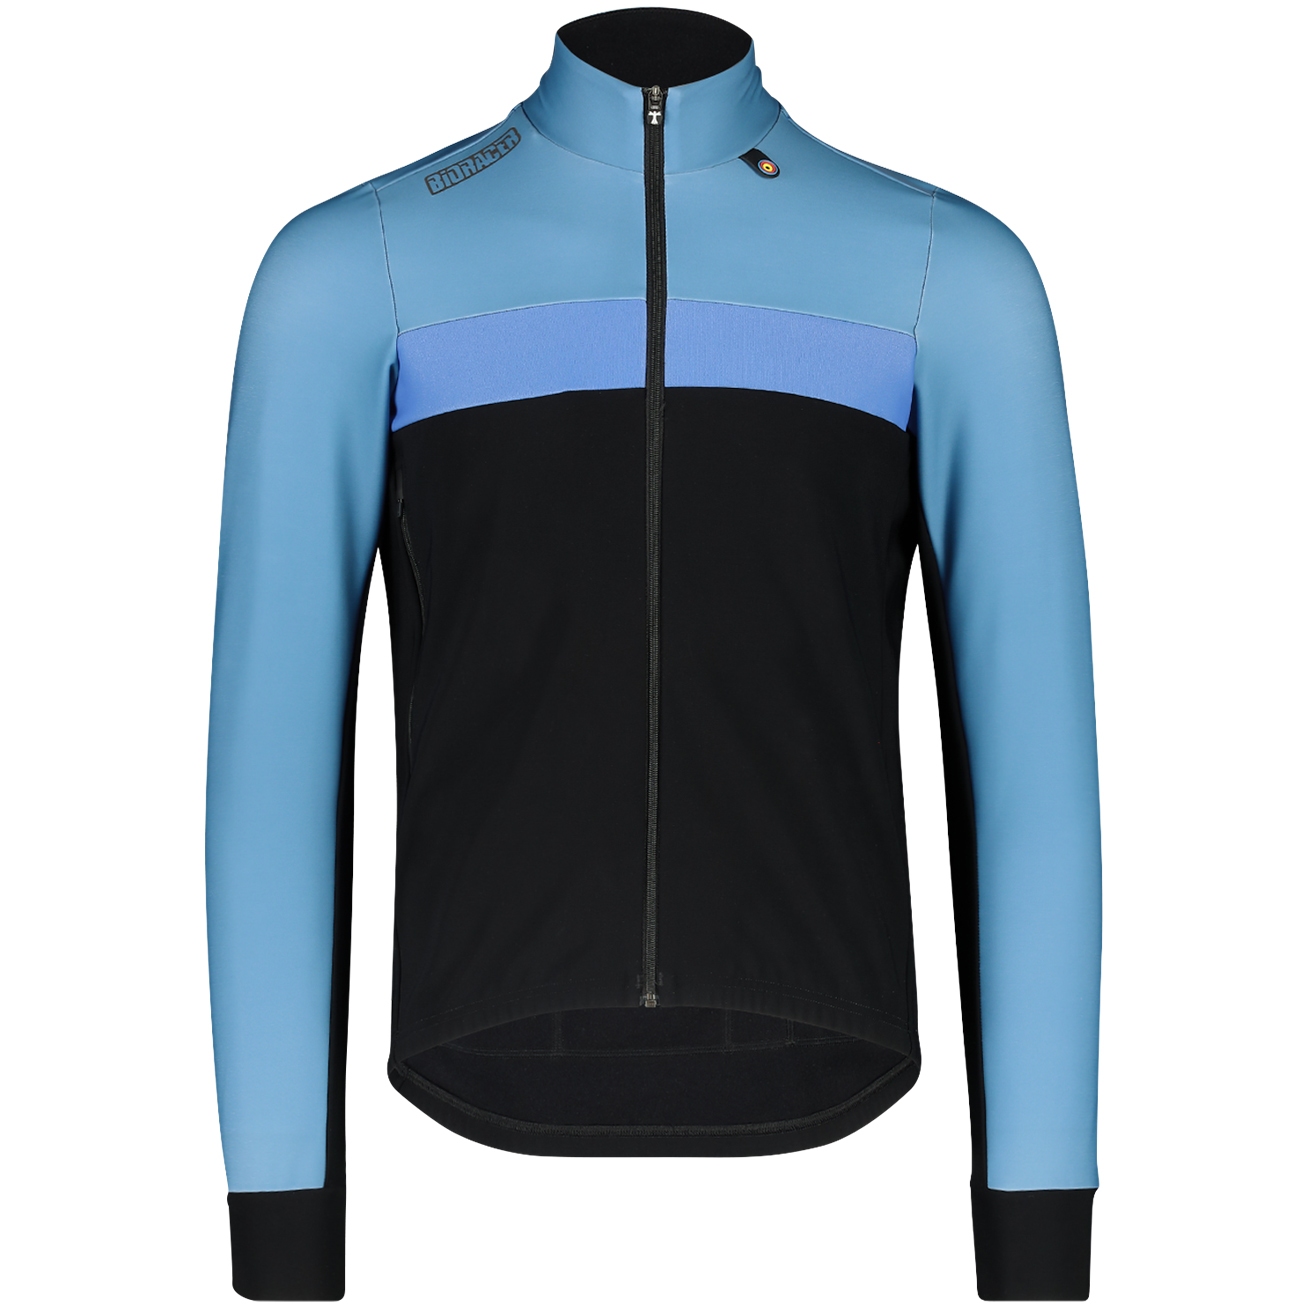 Productfoto van Bioracer Spitfire Tempest Thermal Long Sleeve Jersey - pacific blue